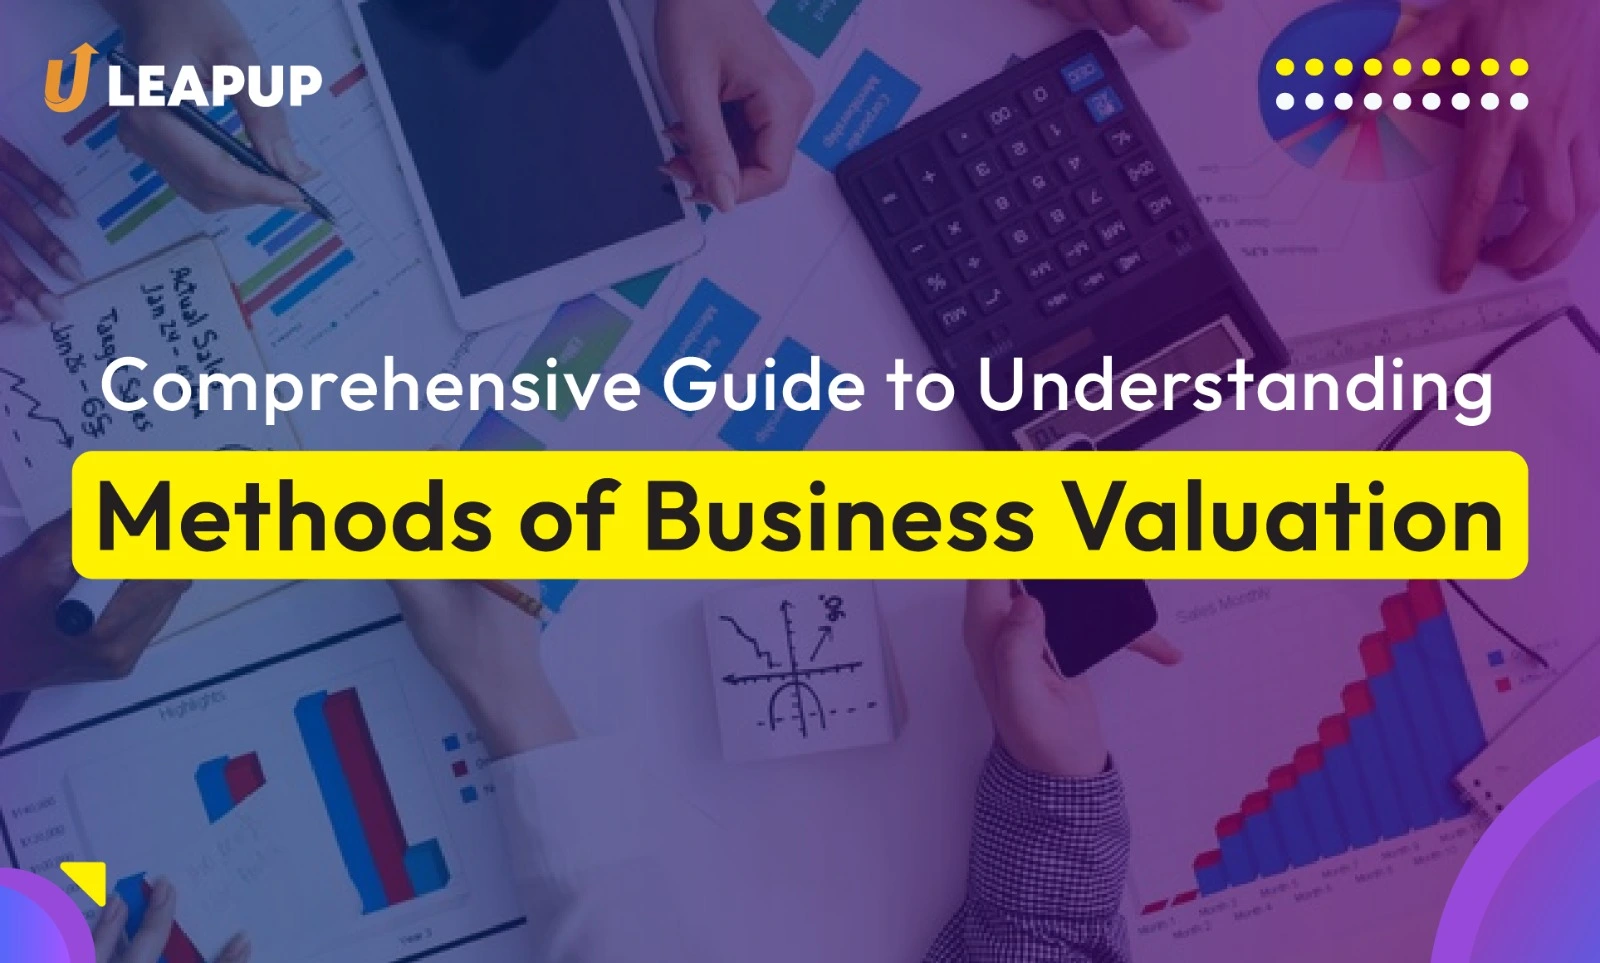 What are the different Methods of Valuation?